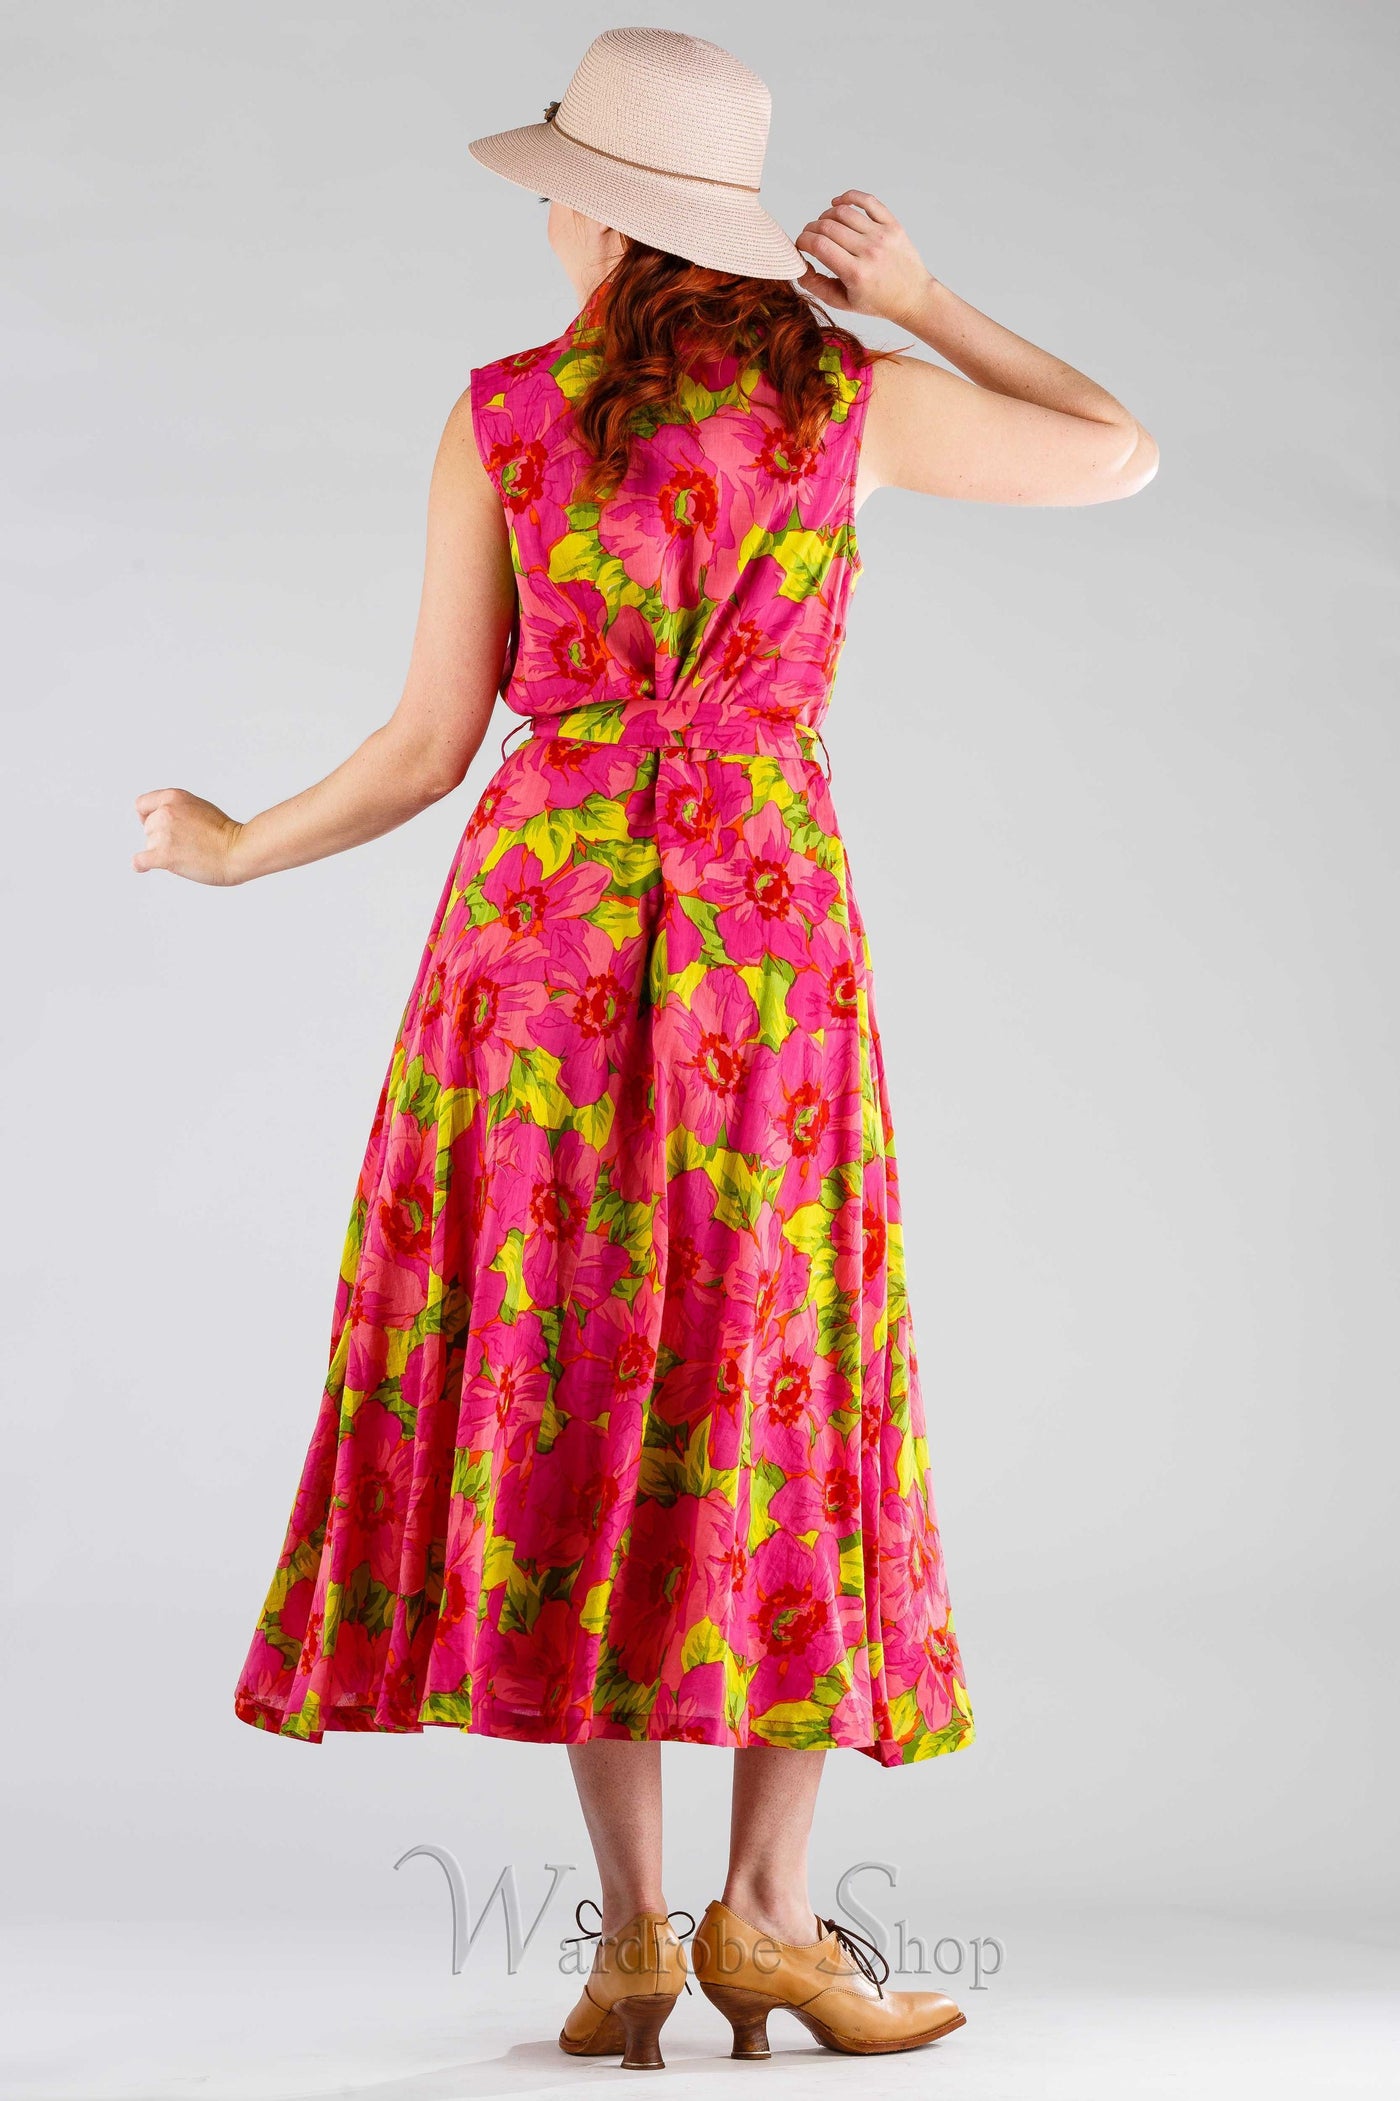 Daydream Vintage Style Dress in Pink | April Cornell - SOLD OUT